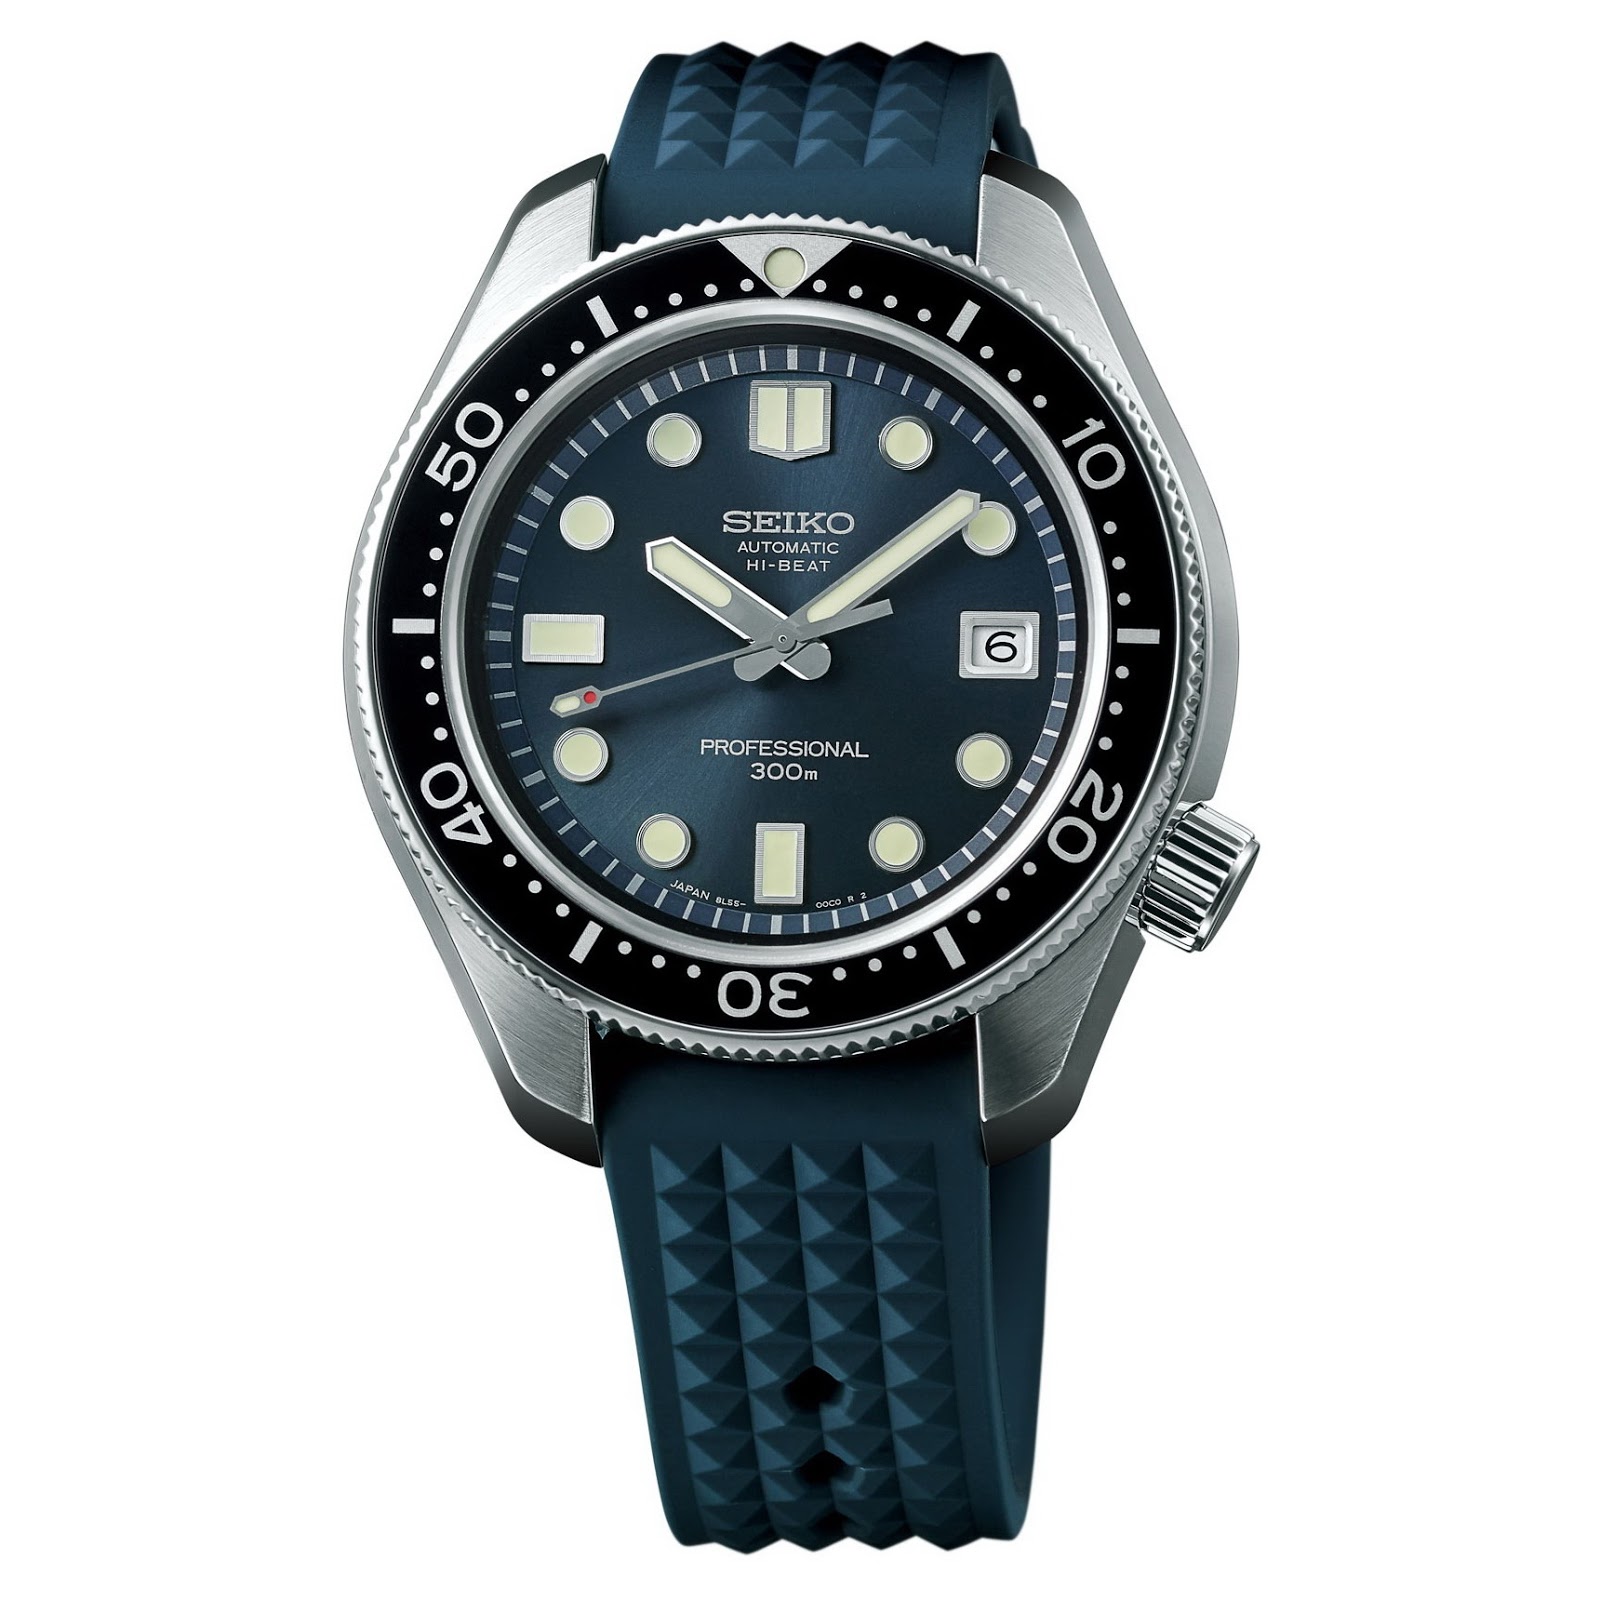 OceanicTime: SEIKO Prospex 55th Anniversary DIVER'S Limited Editions [the  HOLY TRINITY]